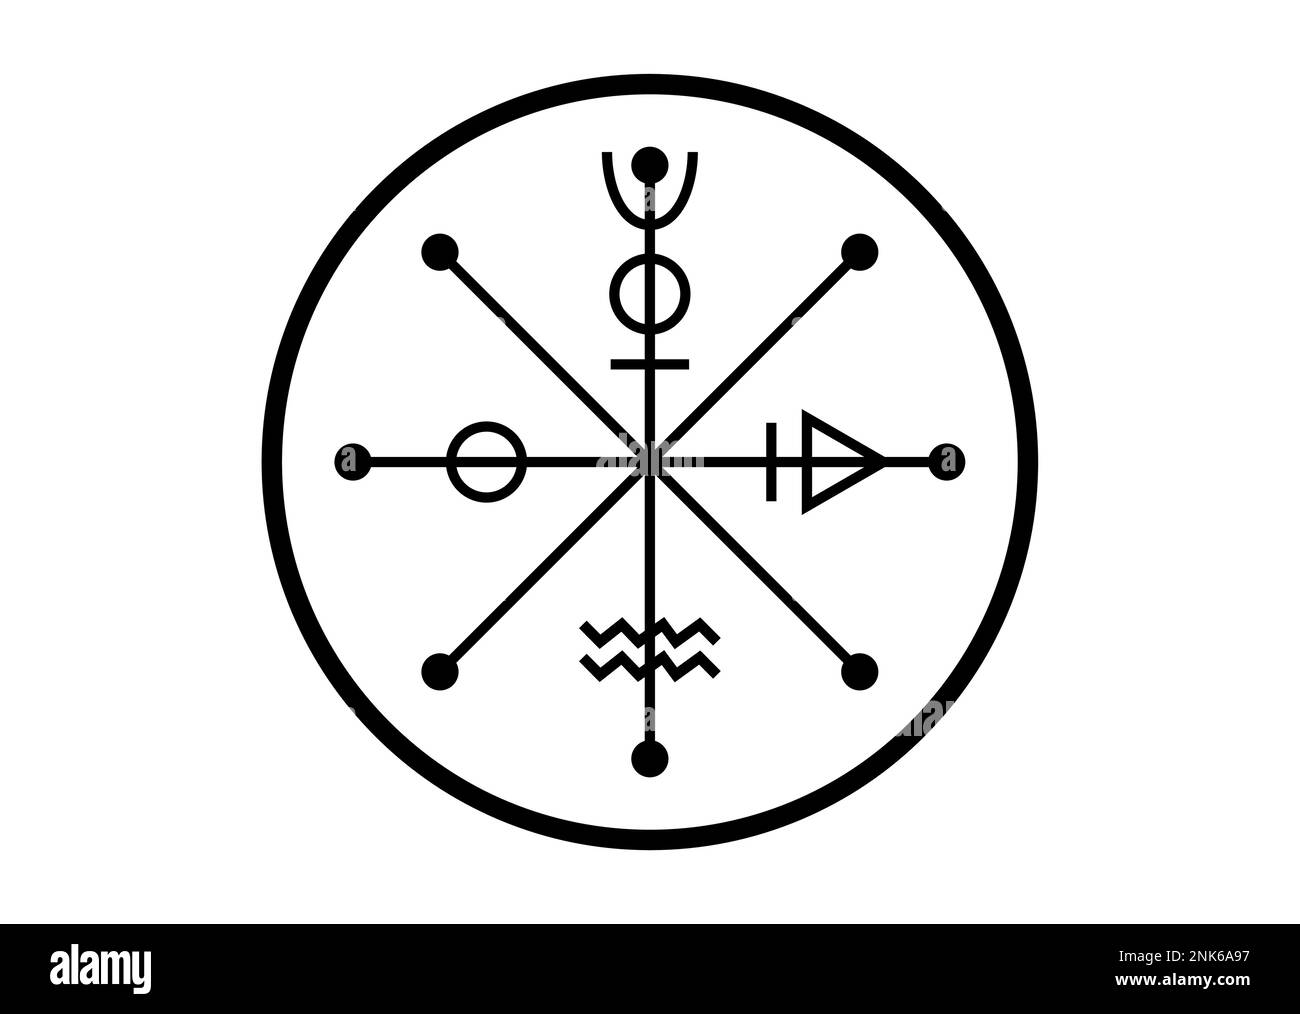 The Wheel of Fotune tarot symbol, worldwide ancient sign, the cycle of life, magical witch talisman lucky charm, black tattoo icon of sacred geometry Stock Vector